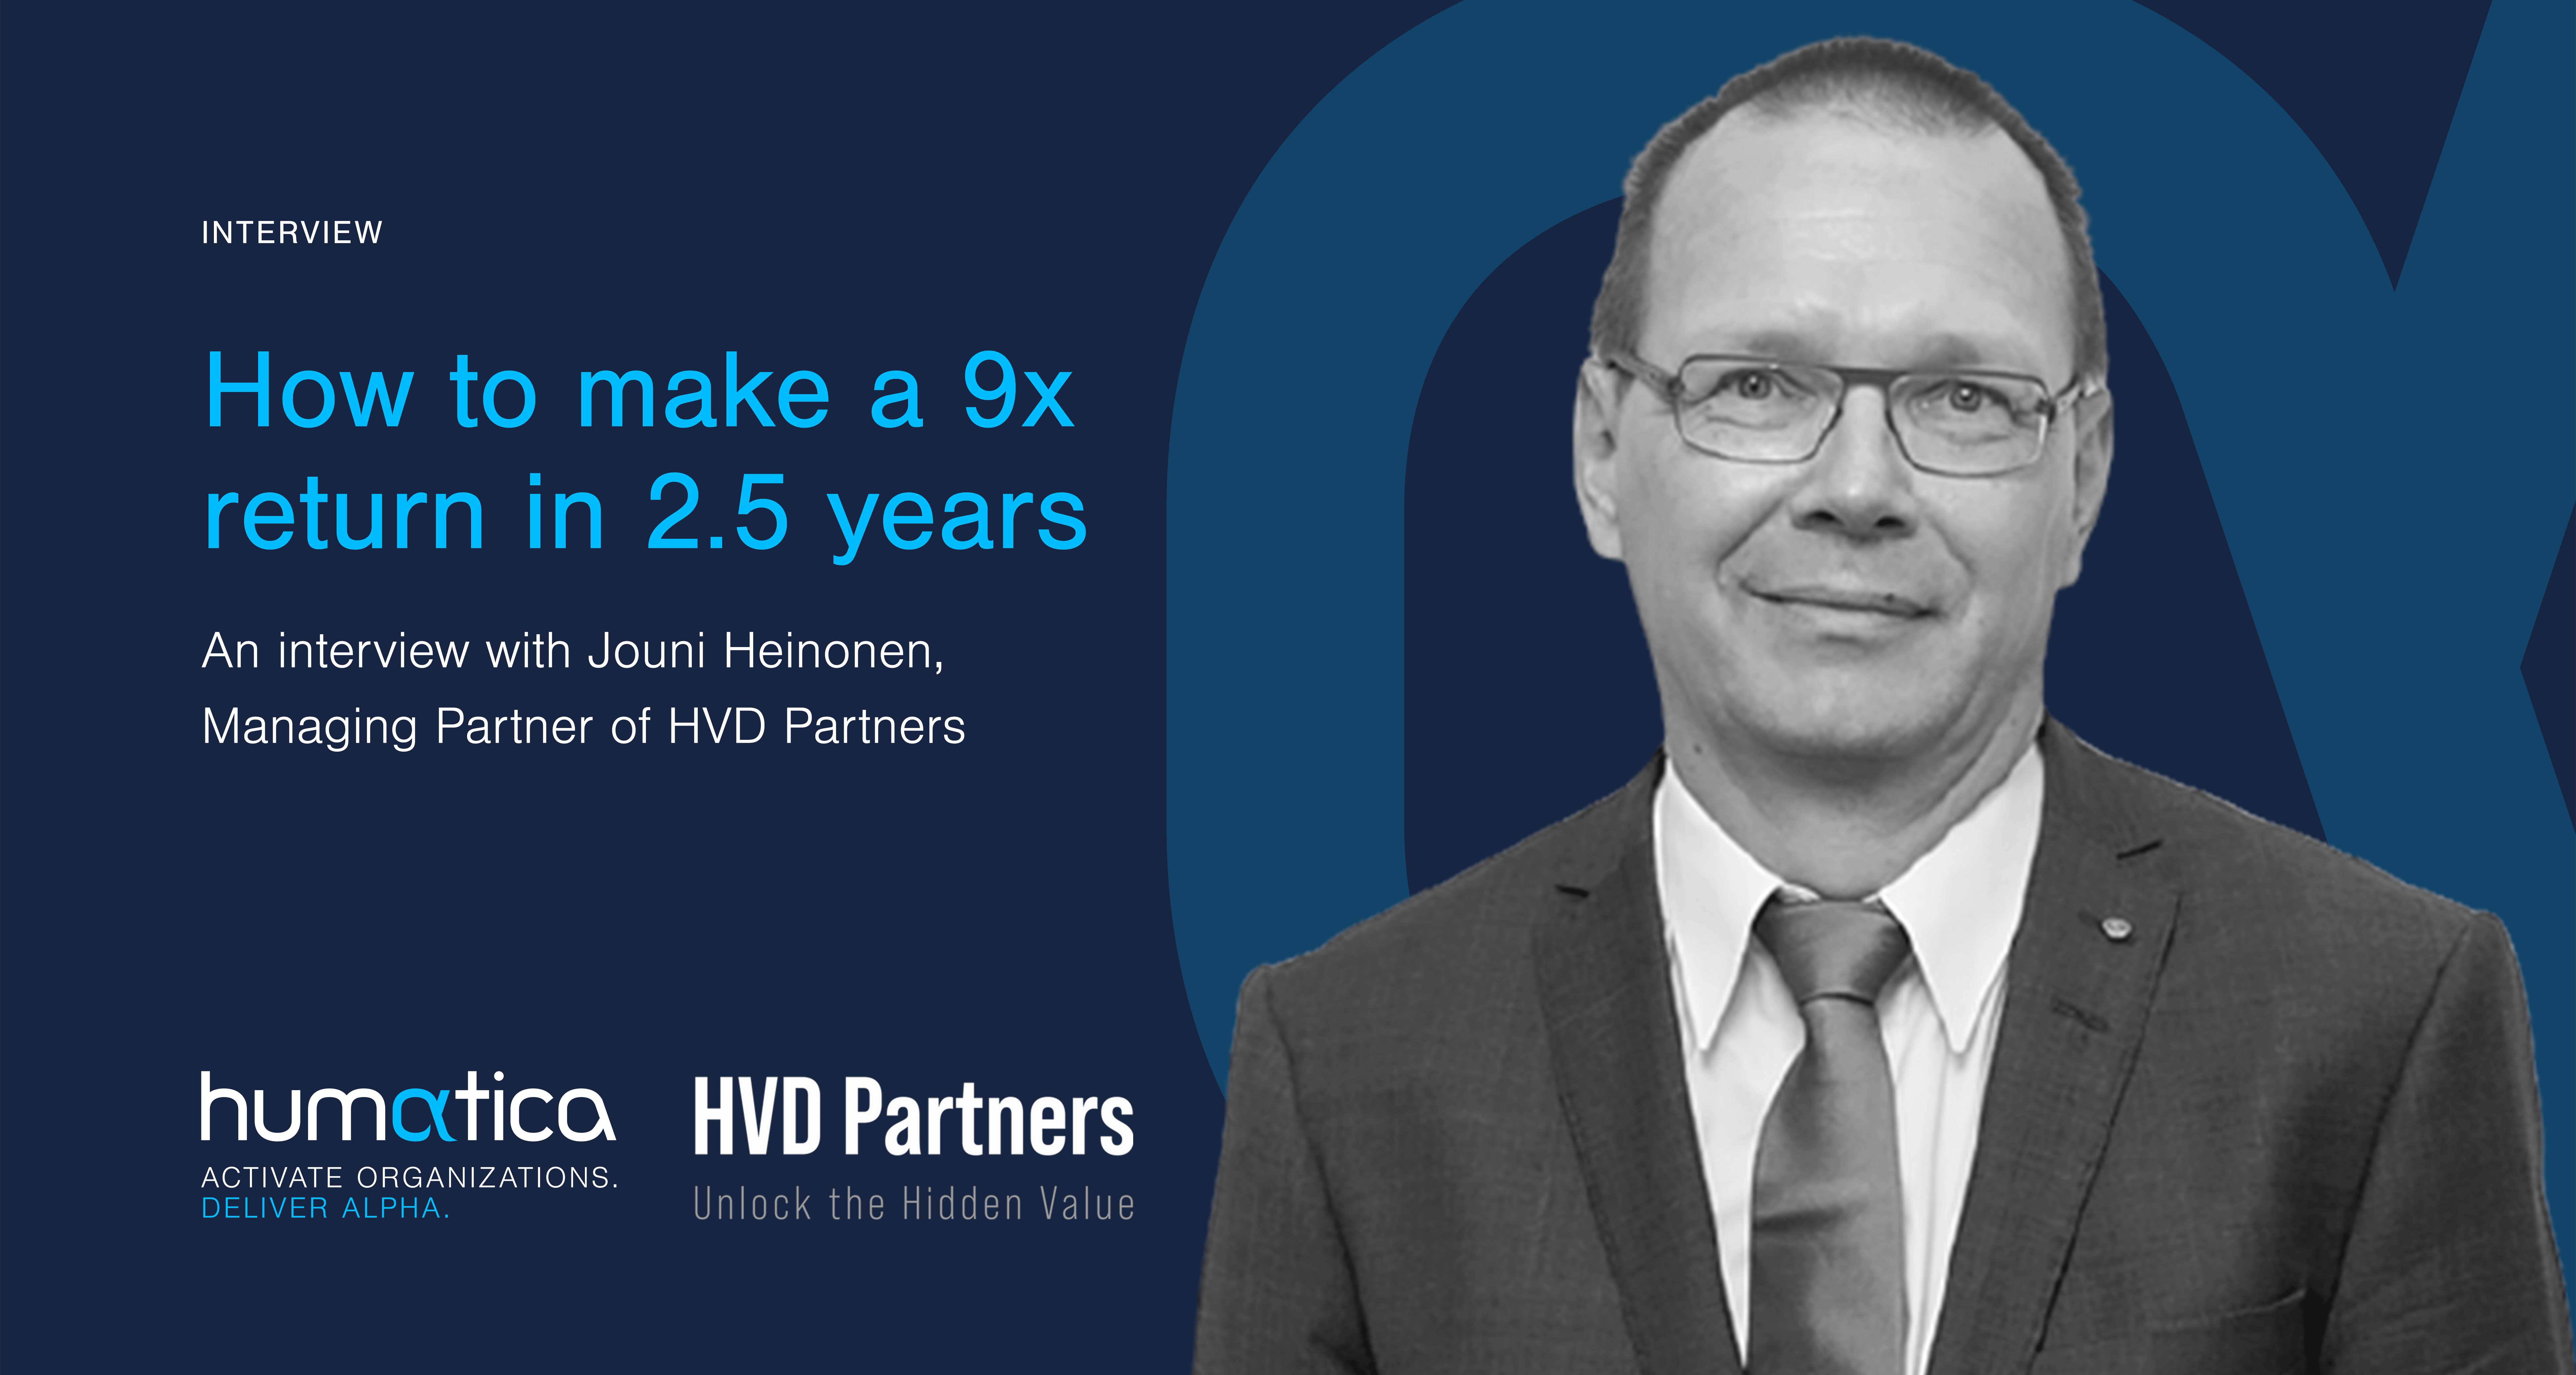 How to make a 9x return in 2.5 years – An interview with Jouni Heinonen of HVD Partners